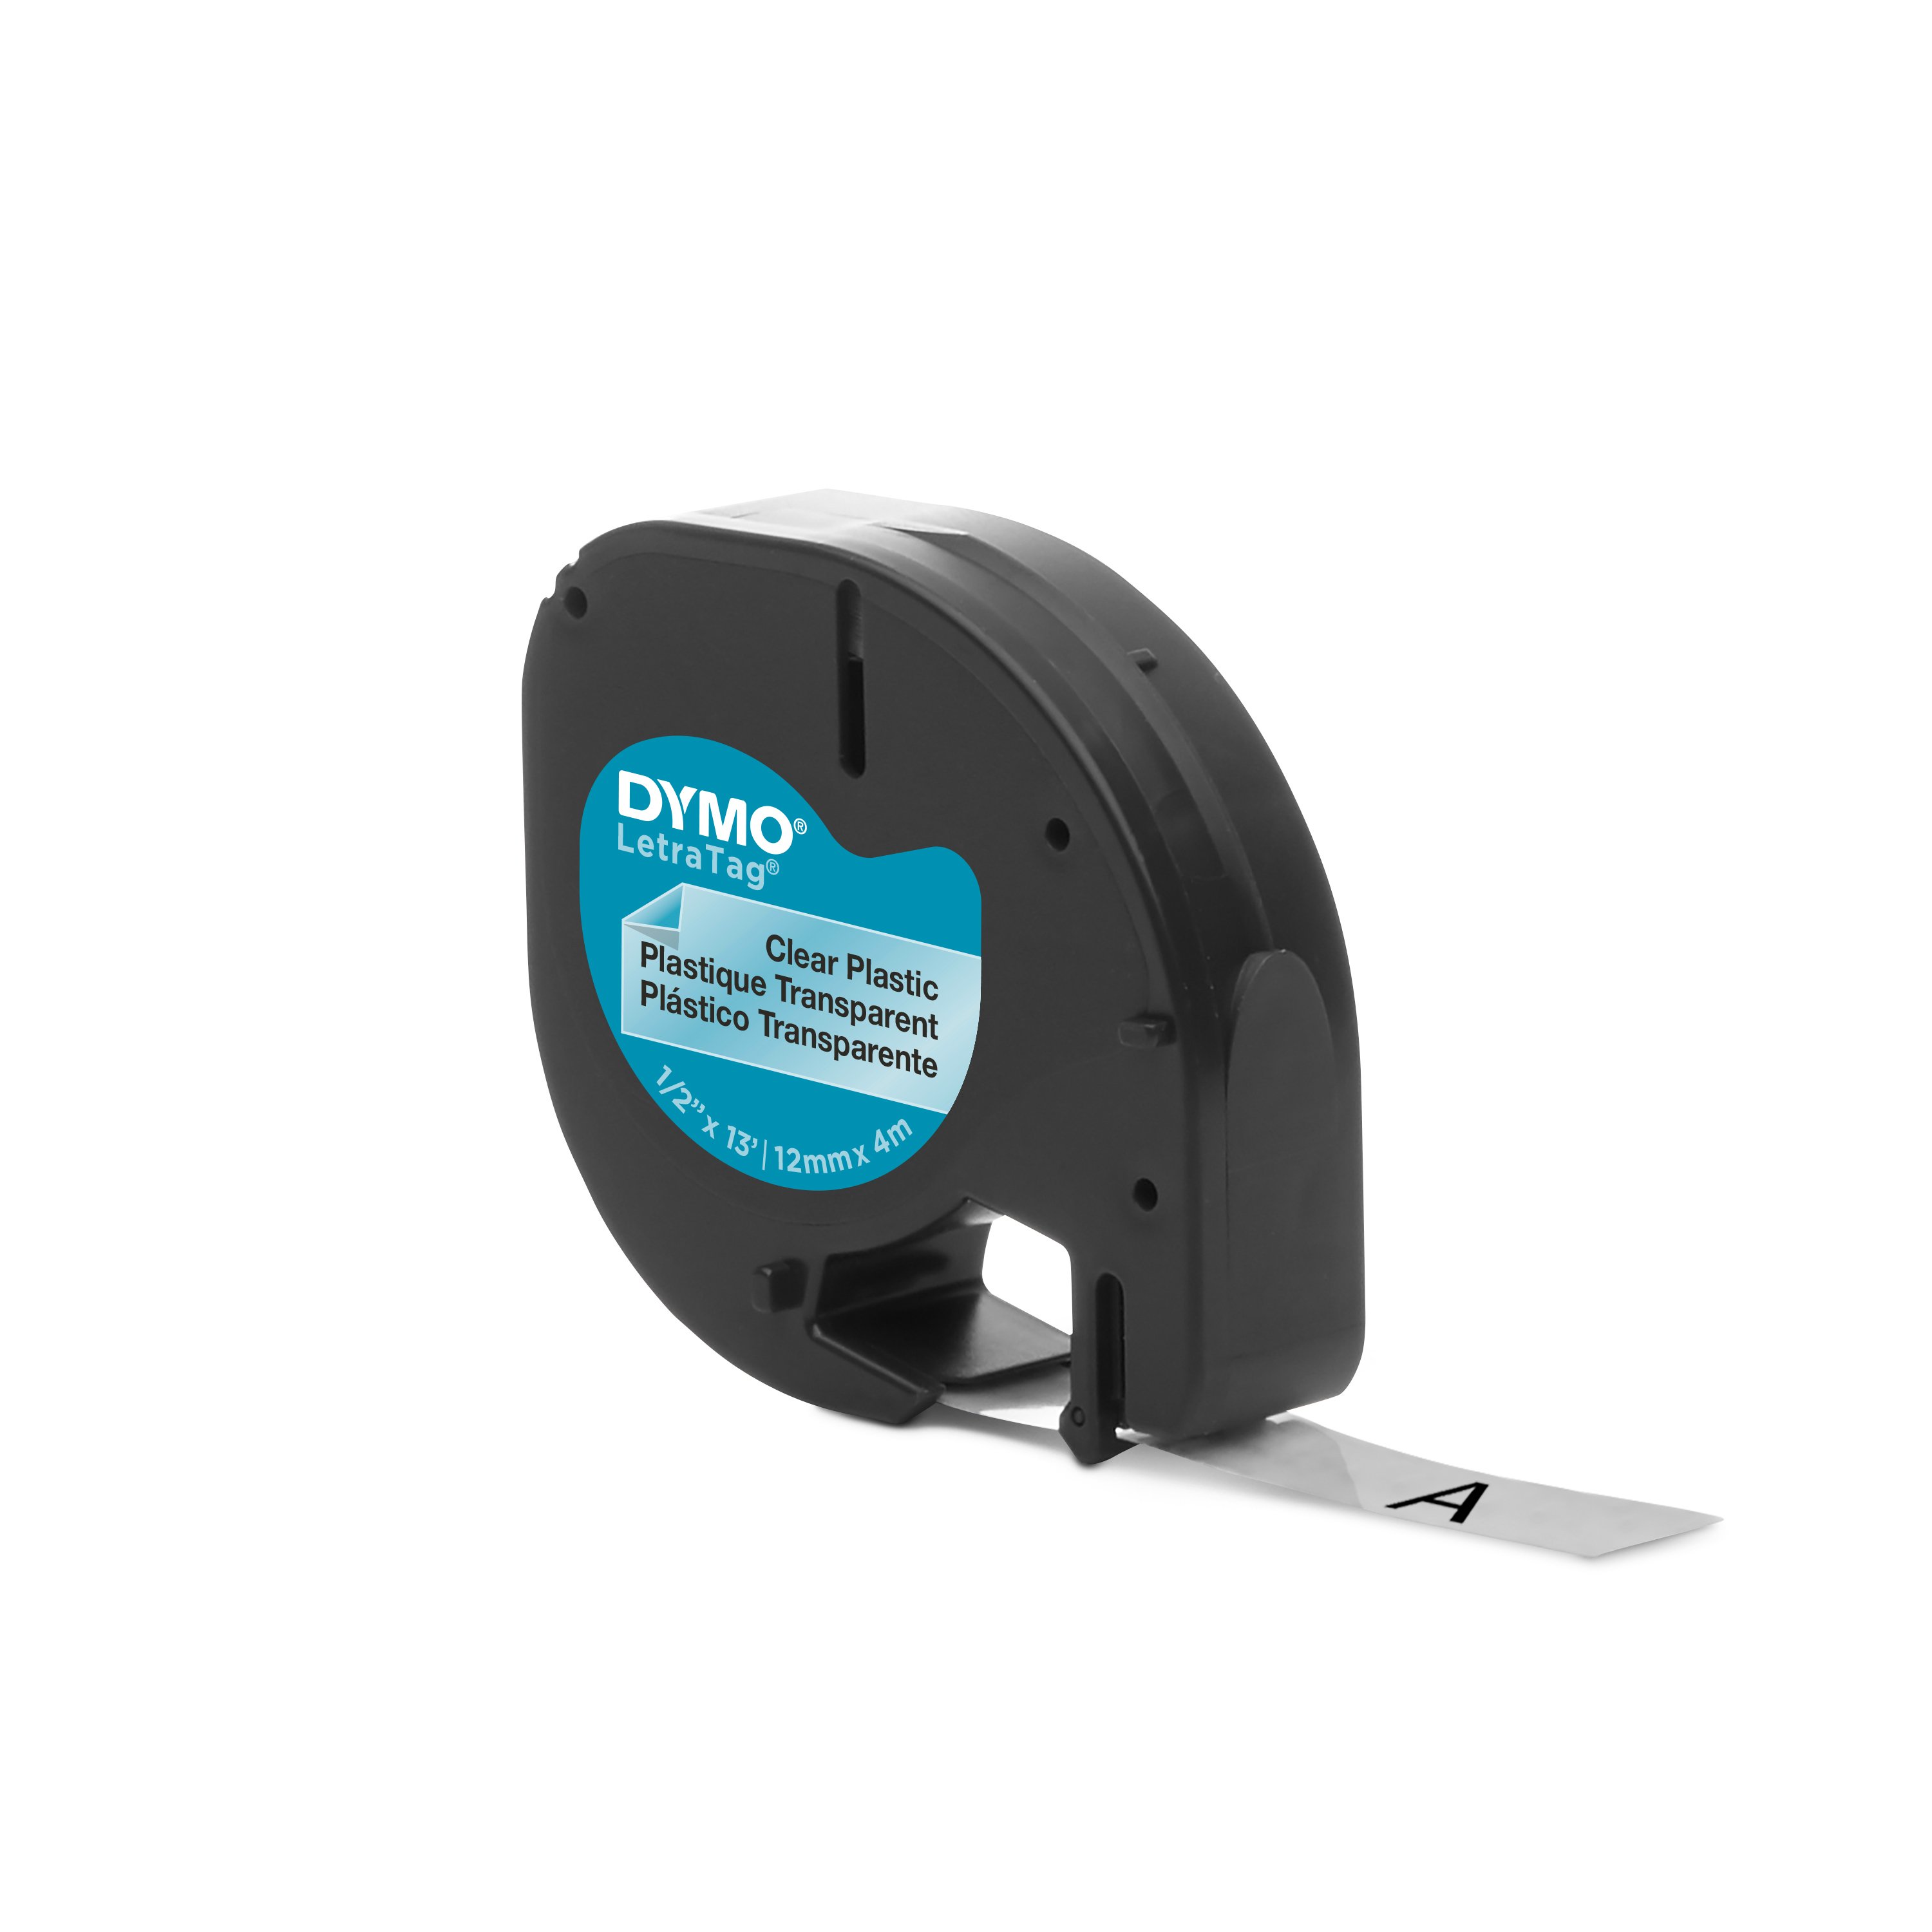 Black on White 1/2 inch x 13 Feet Paper 12mm x 4m LiC-Store Compatible DYMO LetraTag Refills Label Tape LT91330 Work with DYMO LT-100H LT-100T QX50 Label Maker 5-Pack 